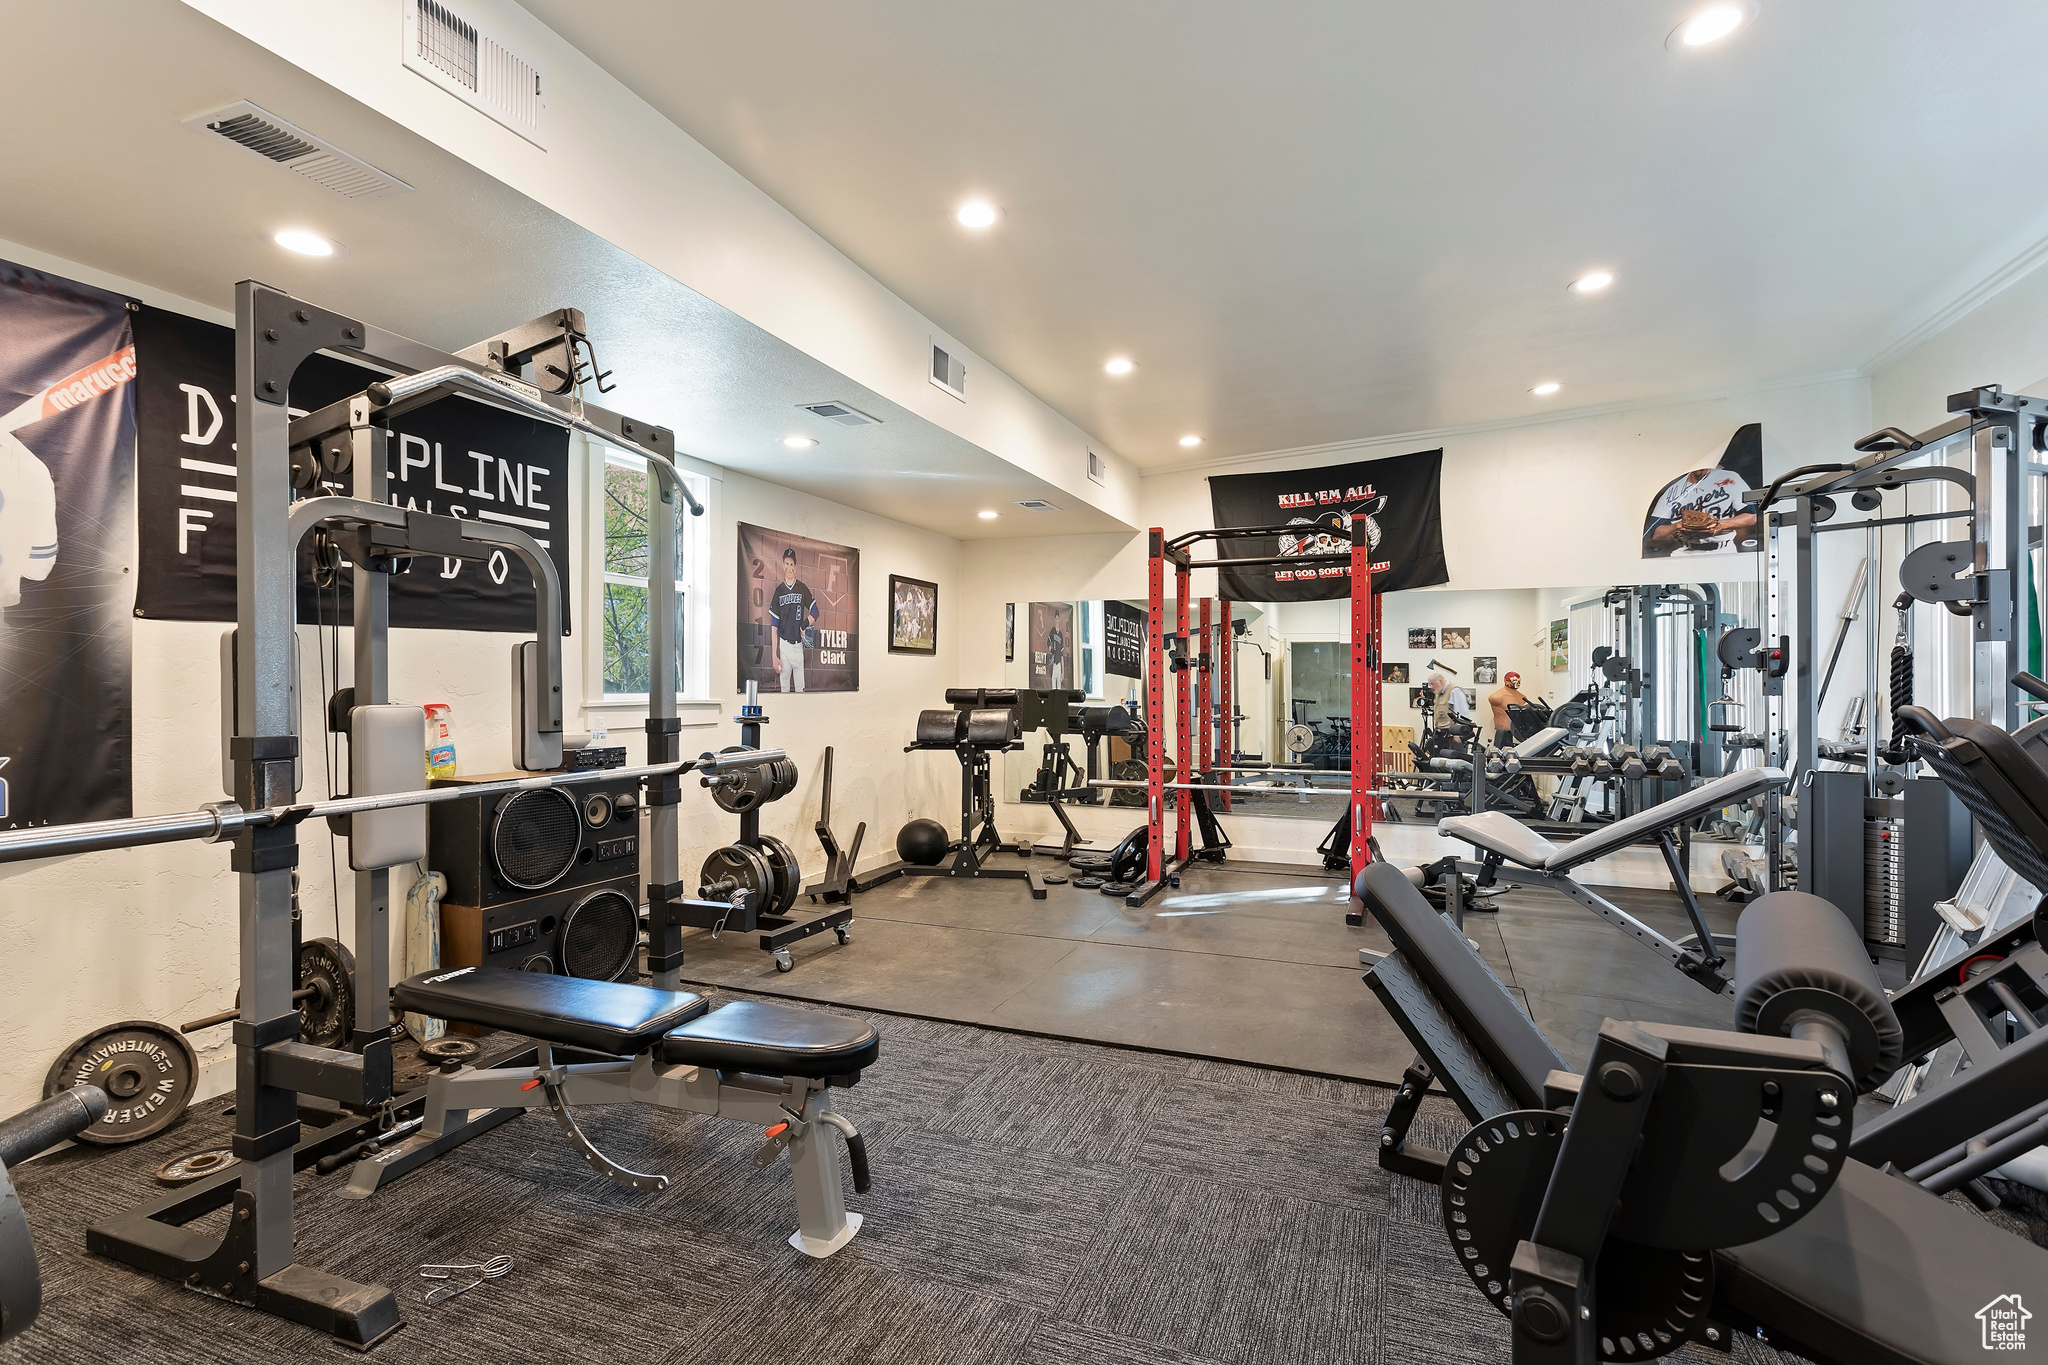 View of exercise room in Shop or commercial business